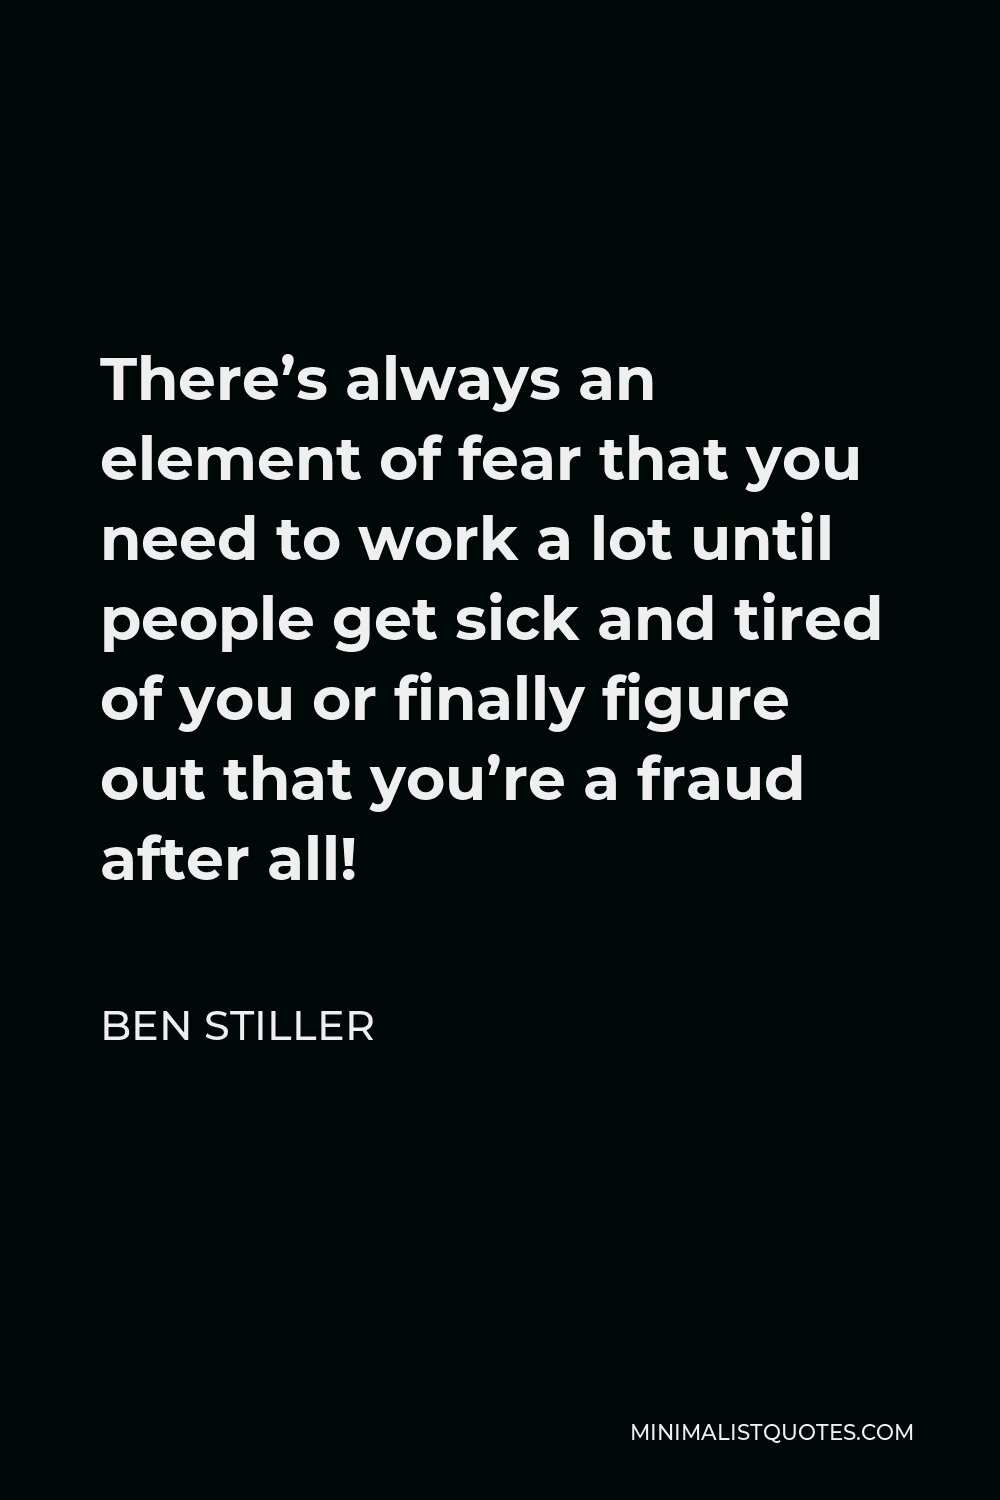 Ben Stiller Quote - There’s always an element of fear that you need to work a lot until people get sick and tired of you or finally figure out that you’re a fraud after all!